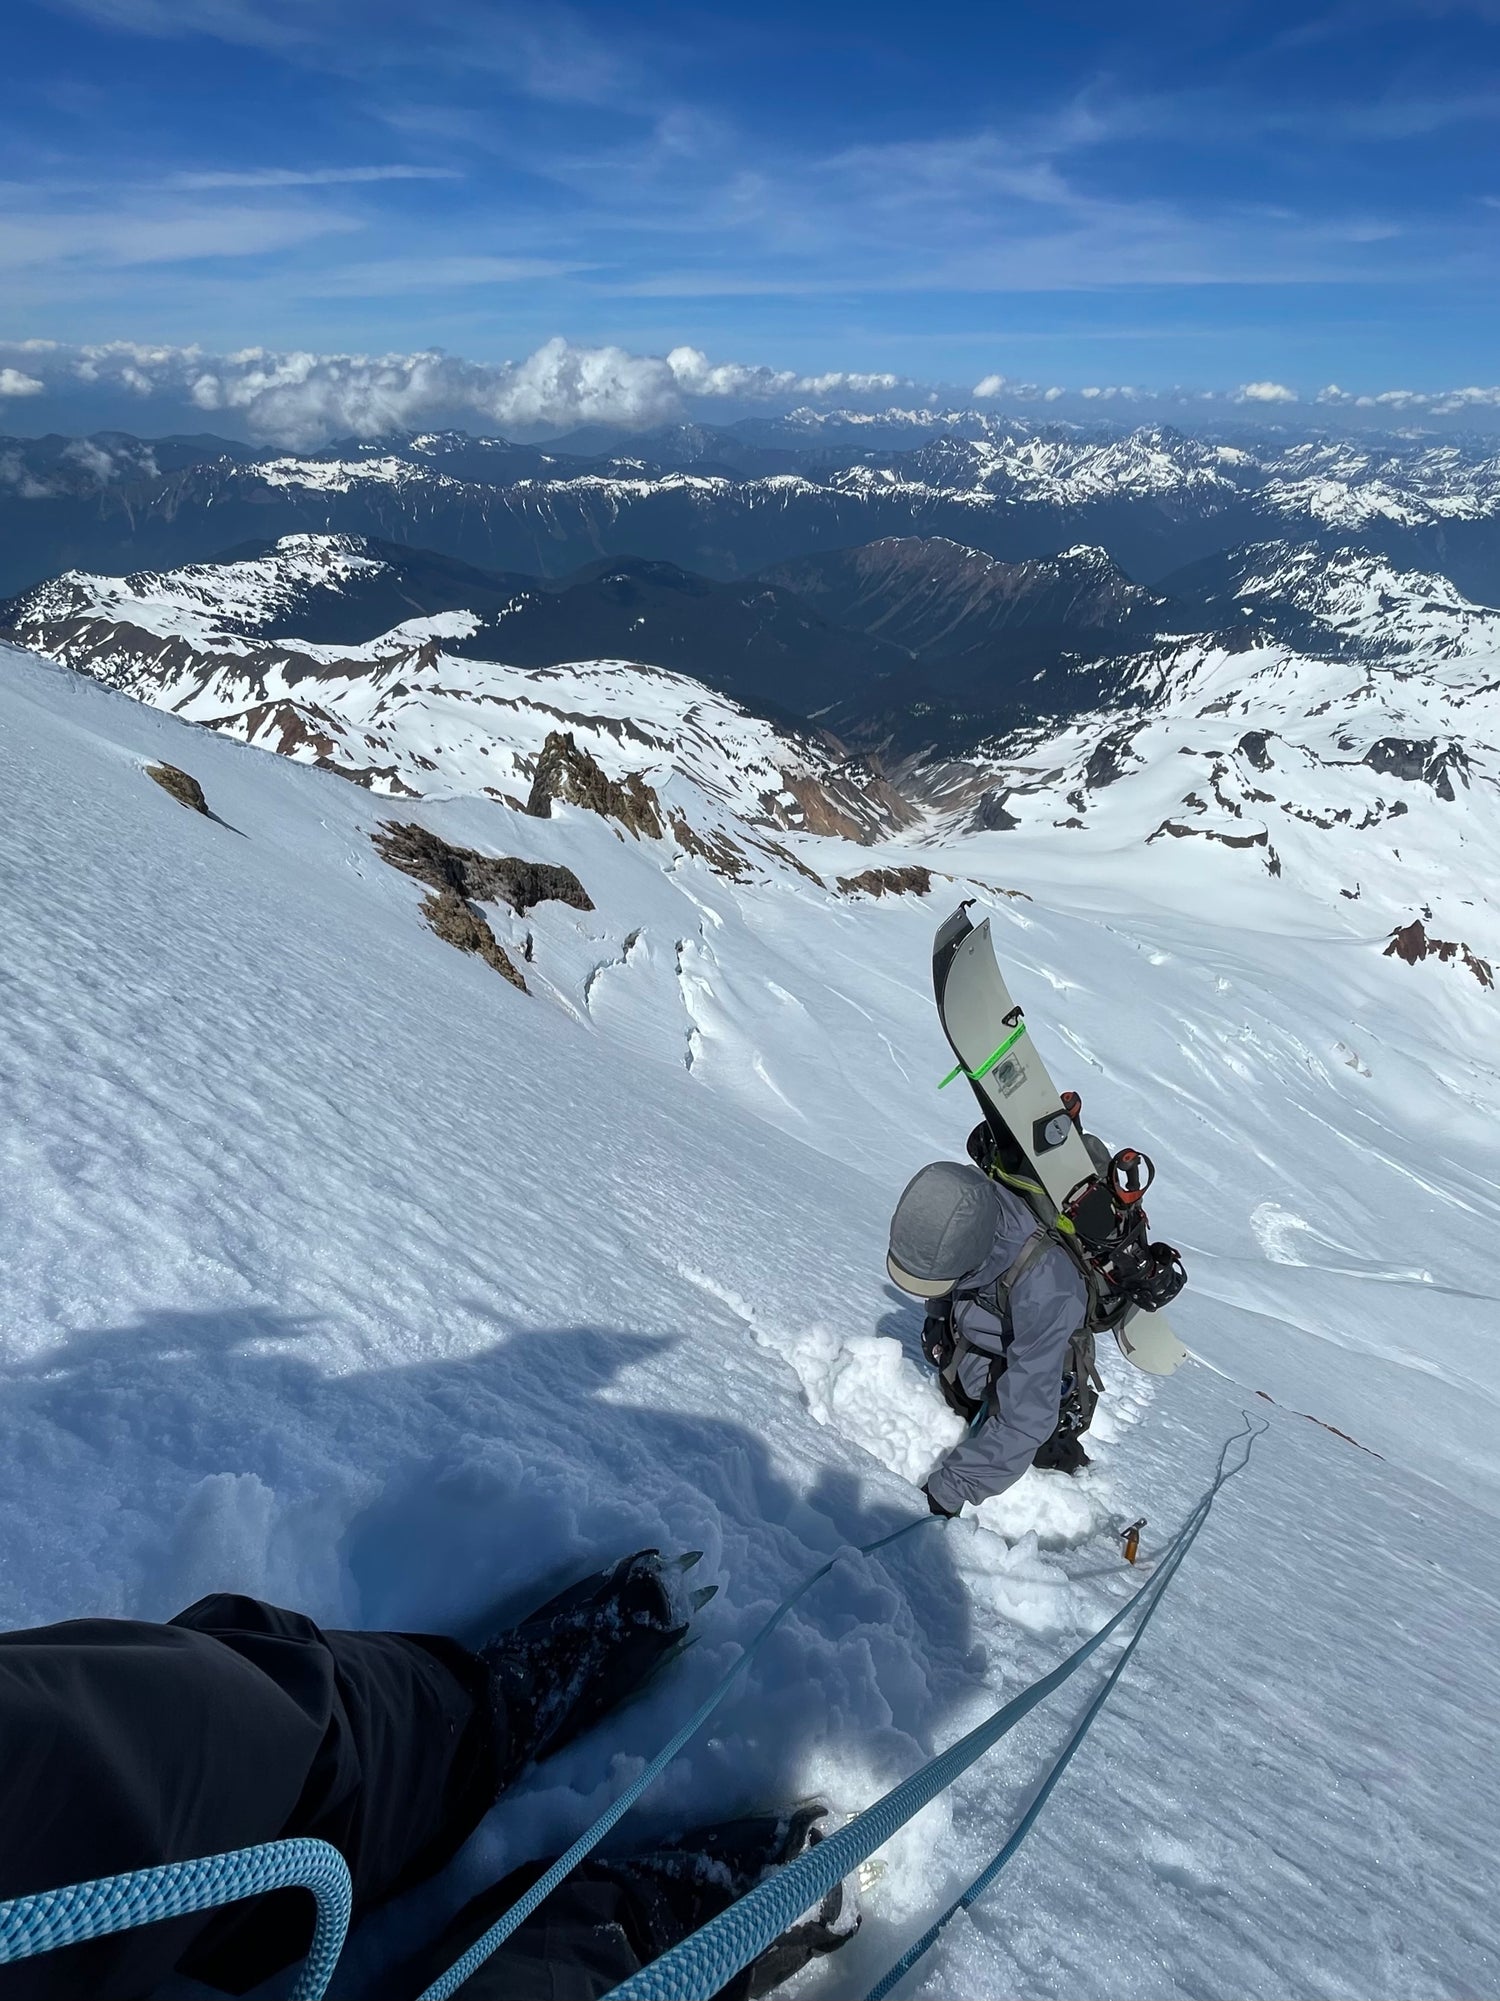 On the steepest section climbing Mount Baker, with splitboard A-framed on pack, we get comfortable using a rope and crampons. Blue skies and Mountain views in the background. 